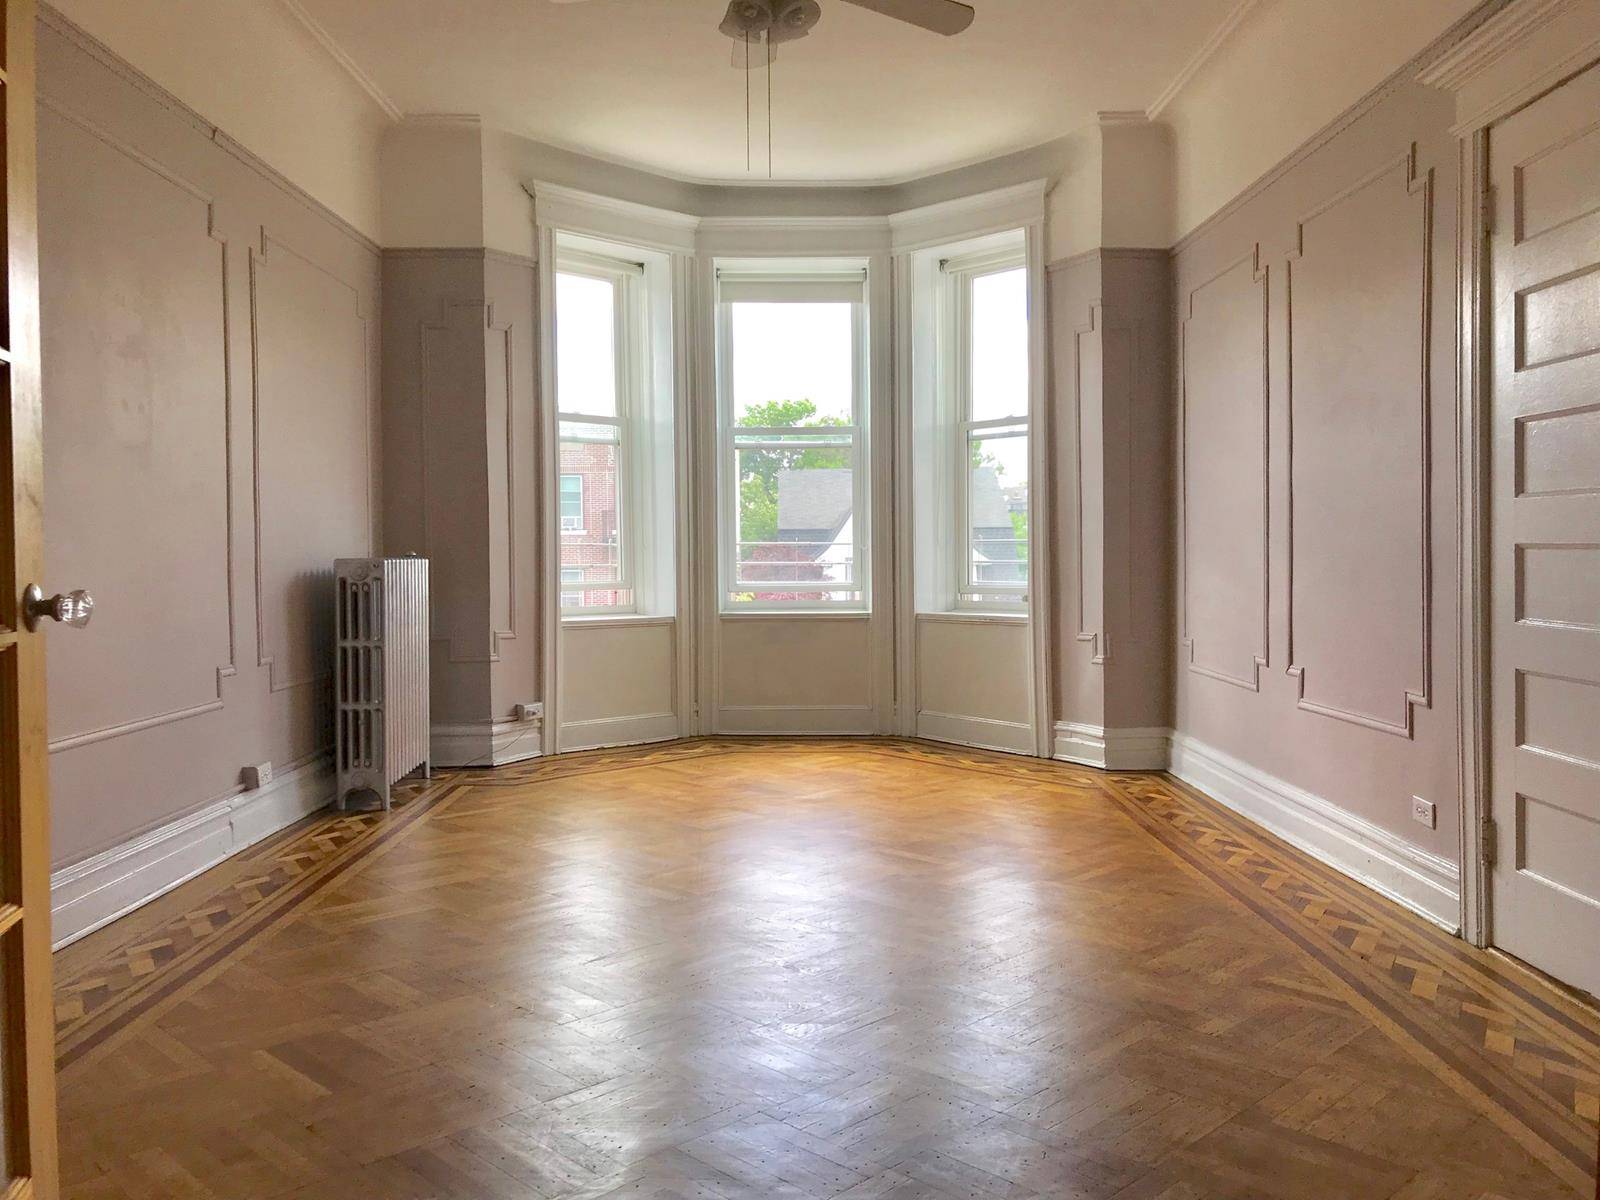 Spacious four room third floor apartment in private three family home.